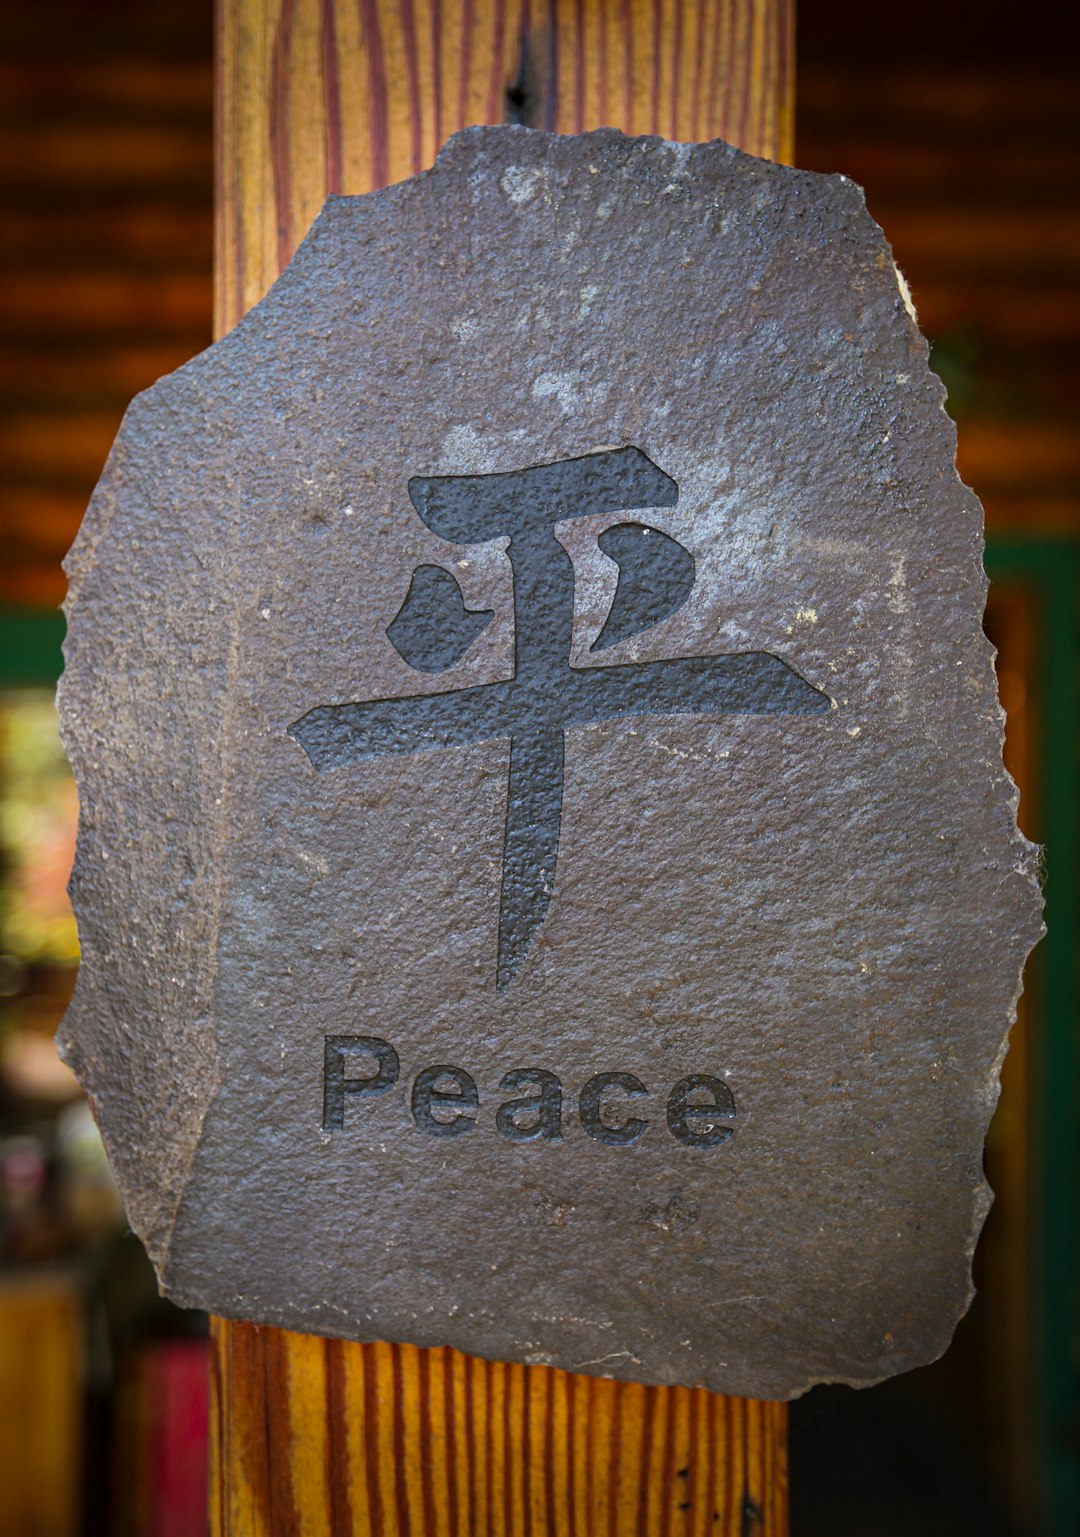 A small little garden store in Kings Beach, California had a lot of peaceful little knick-knacks you could add to your home. But I thought these messages of hope and peace were particularly poignant in these tension filled days.